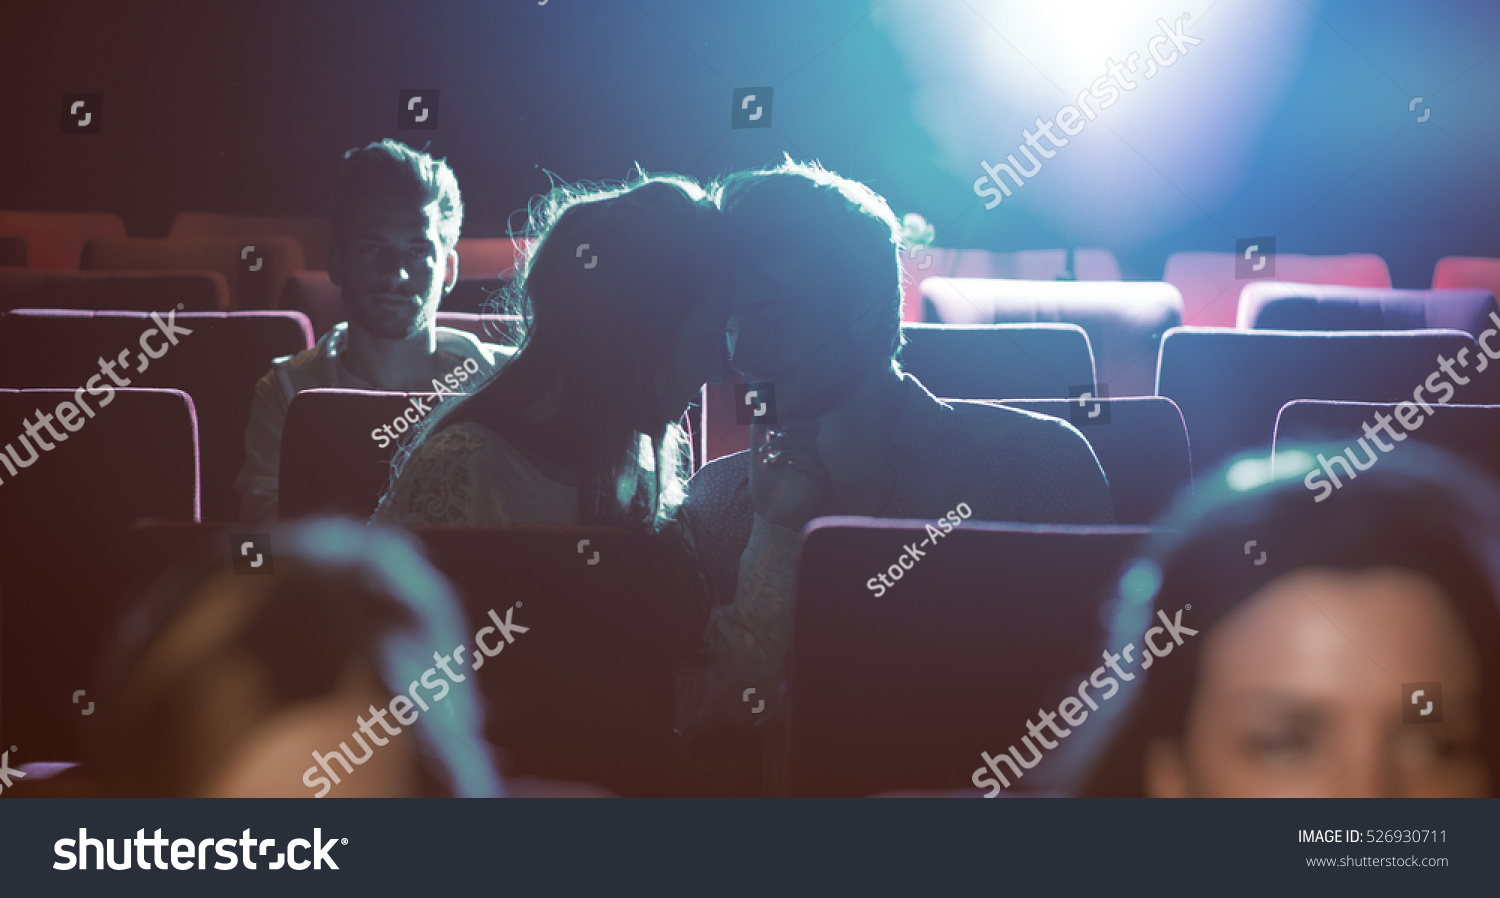 Young romantic loving couple kissing at the cinema, relationships and lifestyle concept #526930711